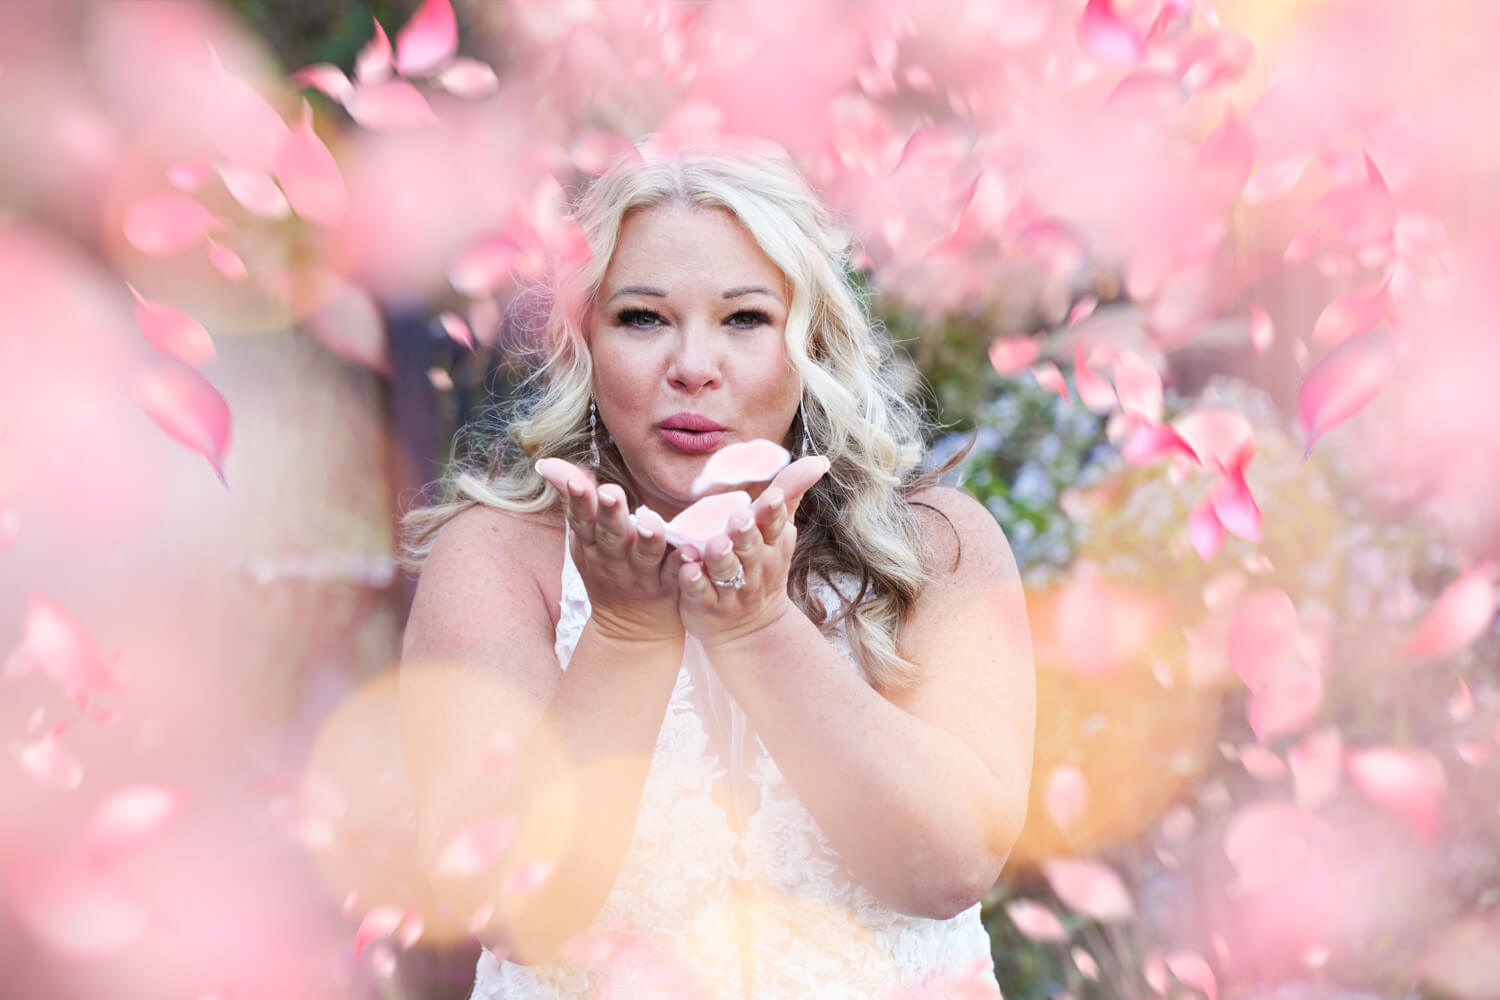 Bride blowing pink petals out of her hands